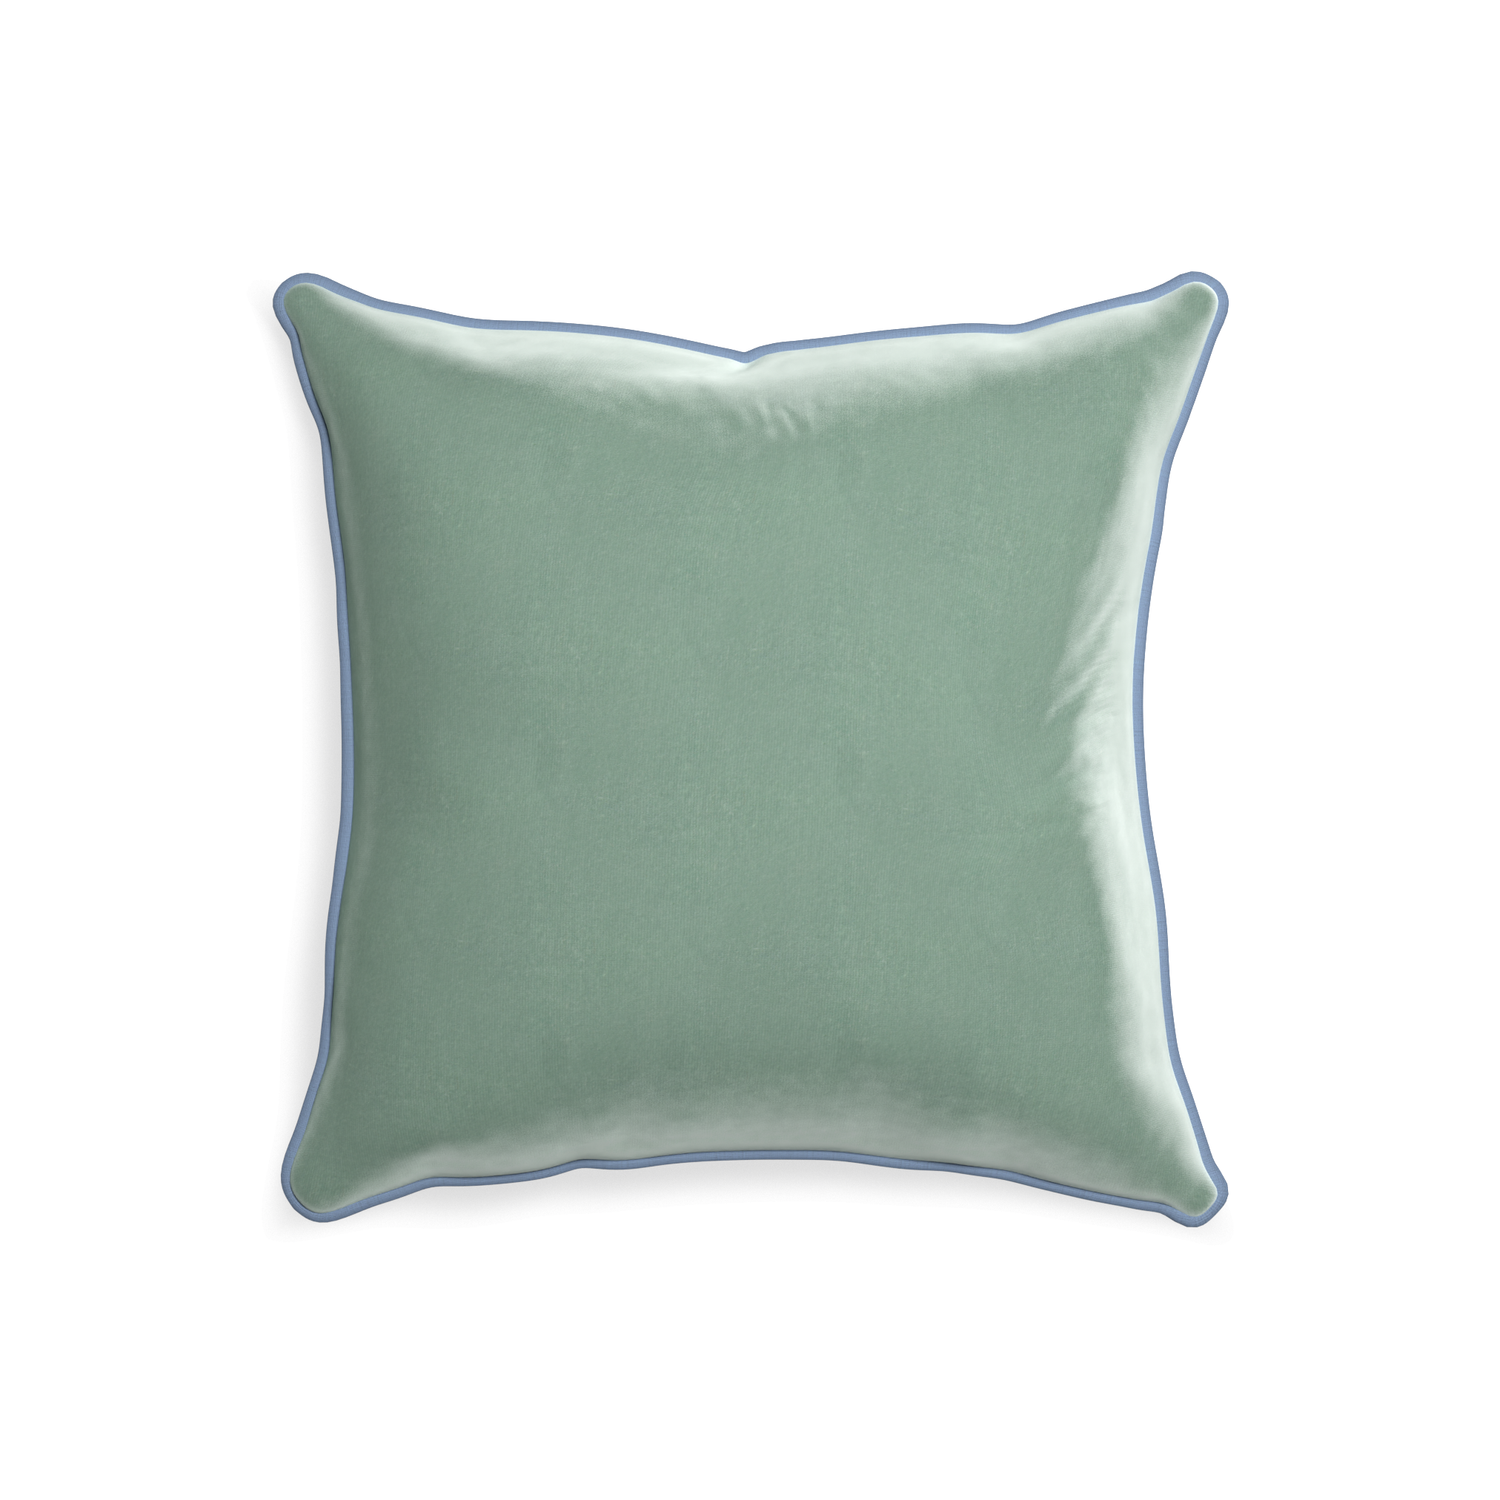 square blue green velvet pillow with sky blue piping